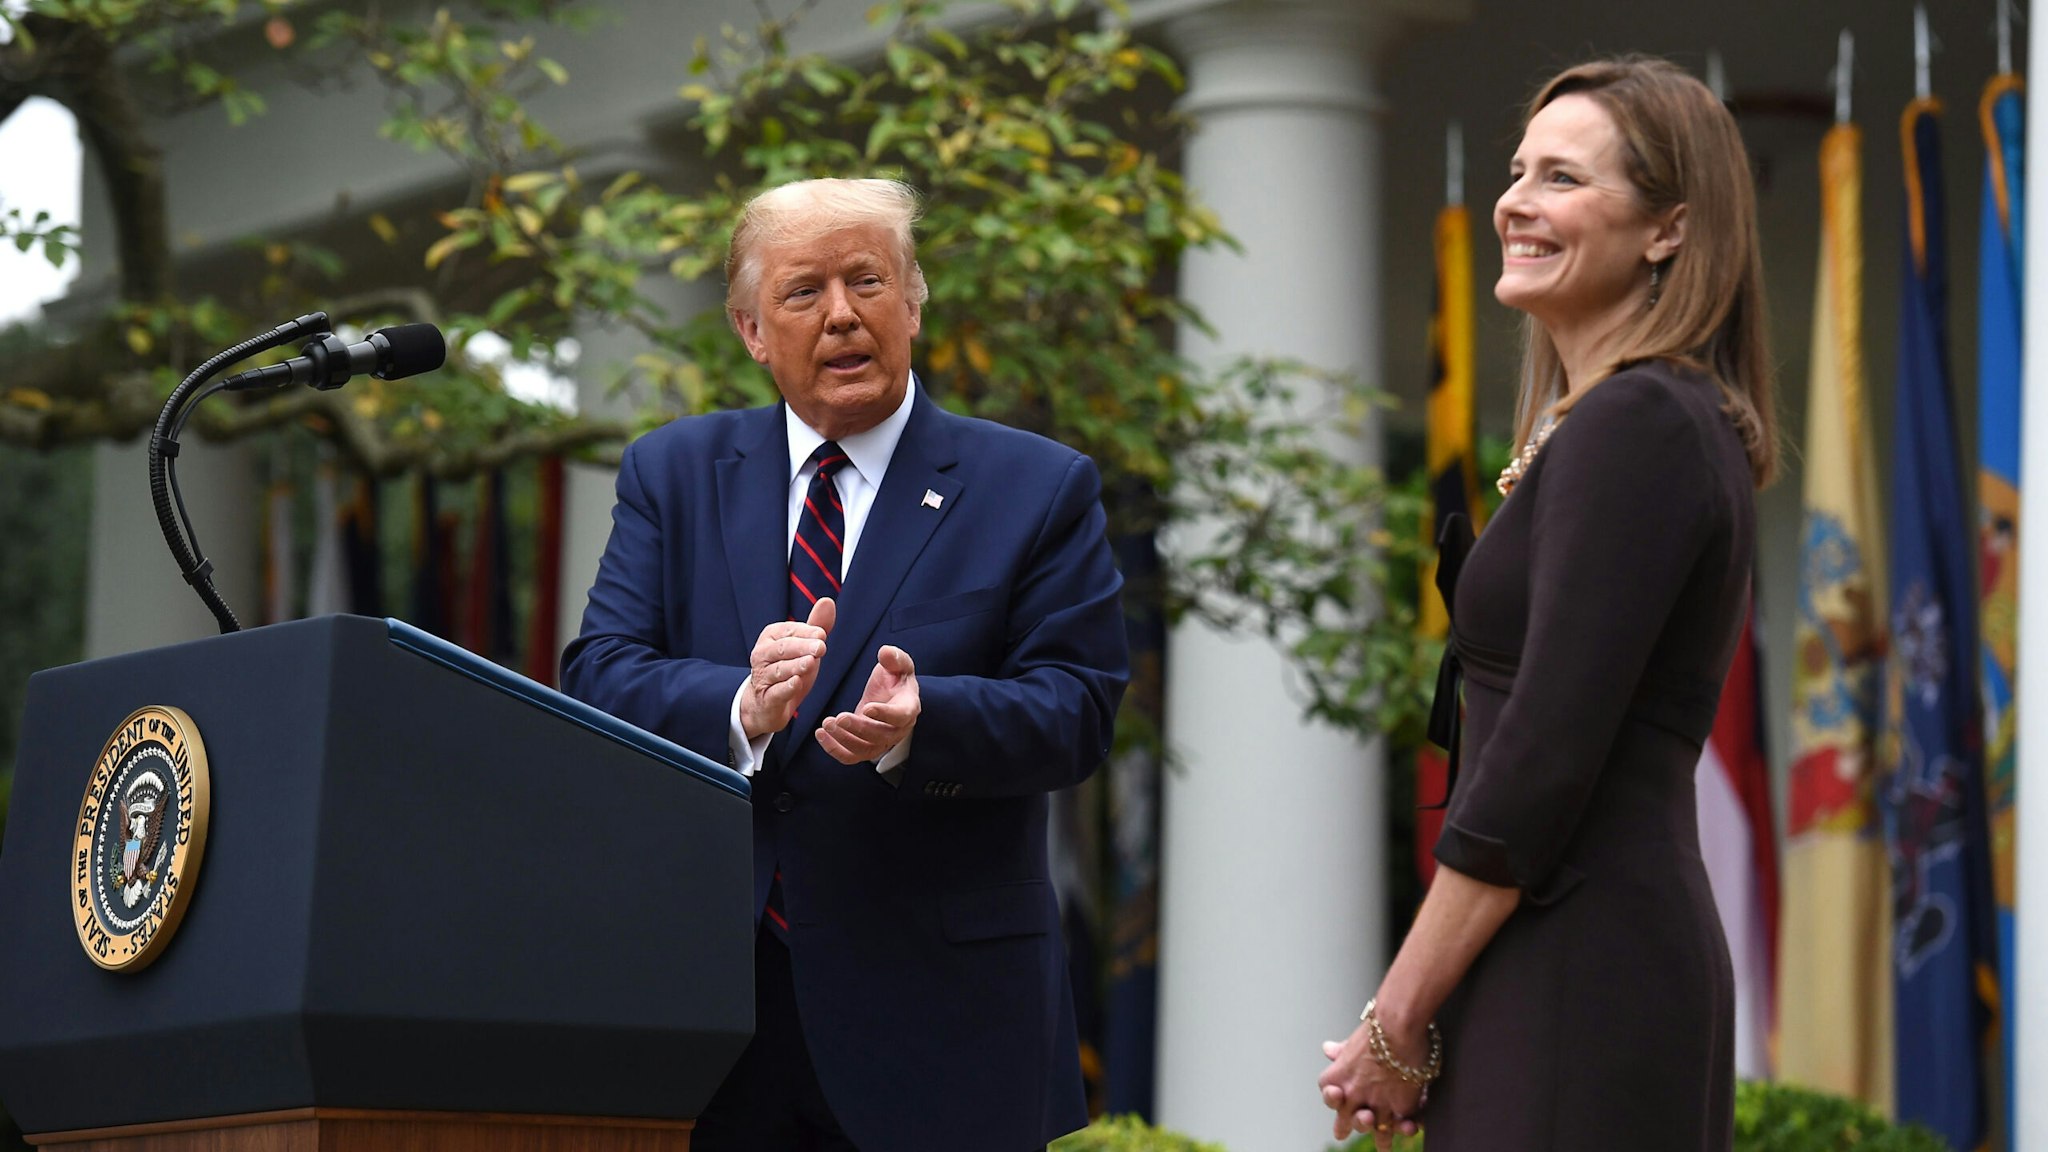 US President Donald Trump announces his US Supreme Court nominee, Judge Amy Coney Barrett (R), in the Rose Garden of the White House in Washington, DC on September 26, 2020. - Barrett, if confirmed by the US Senate, will replace Justice Ruth Bader Ginsburg, who died on September 18.